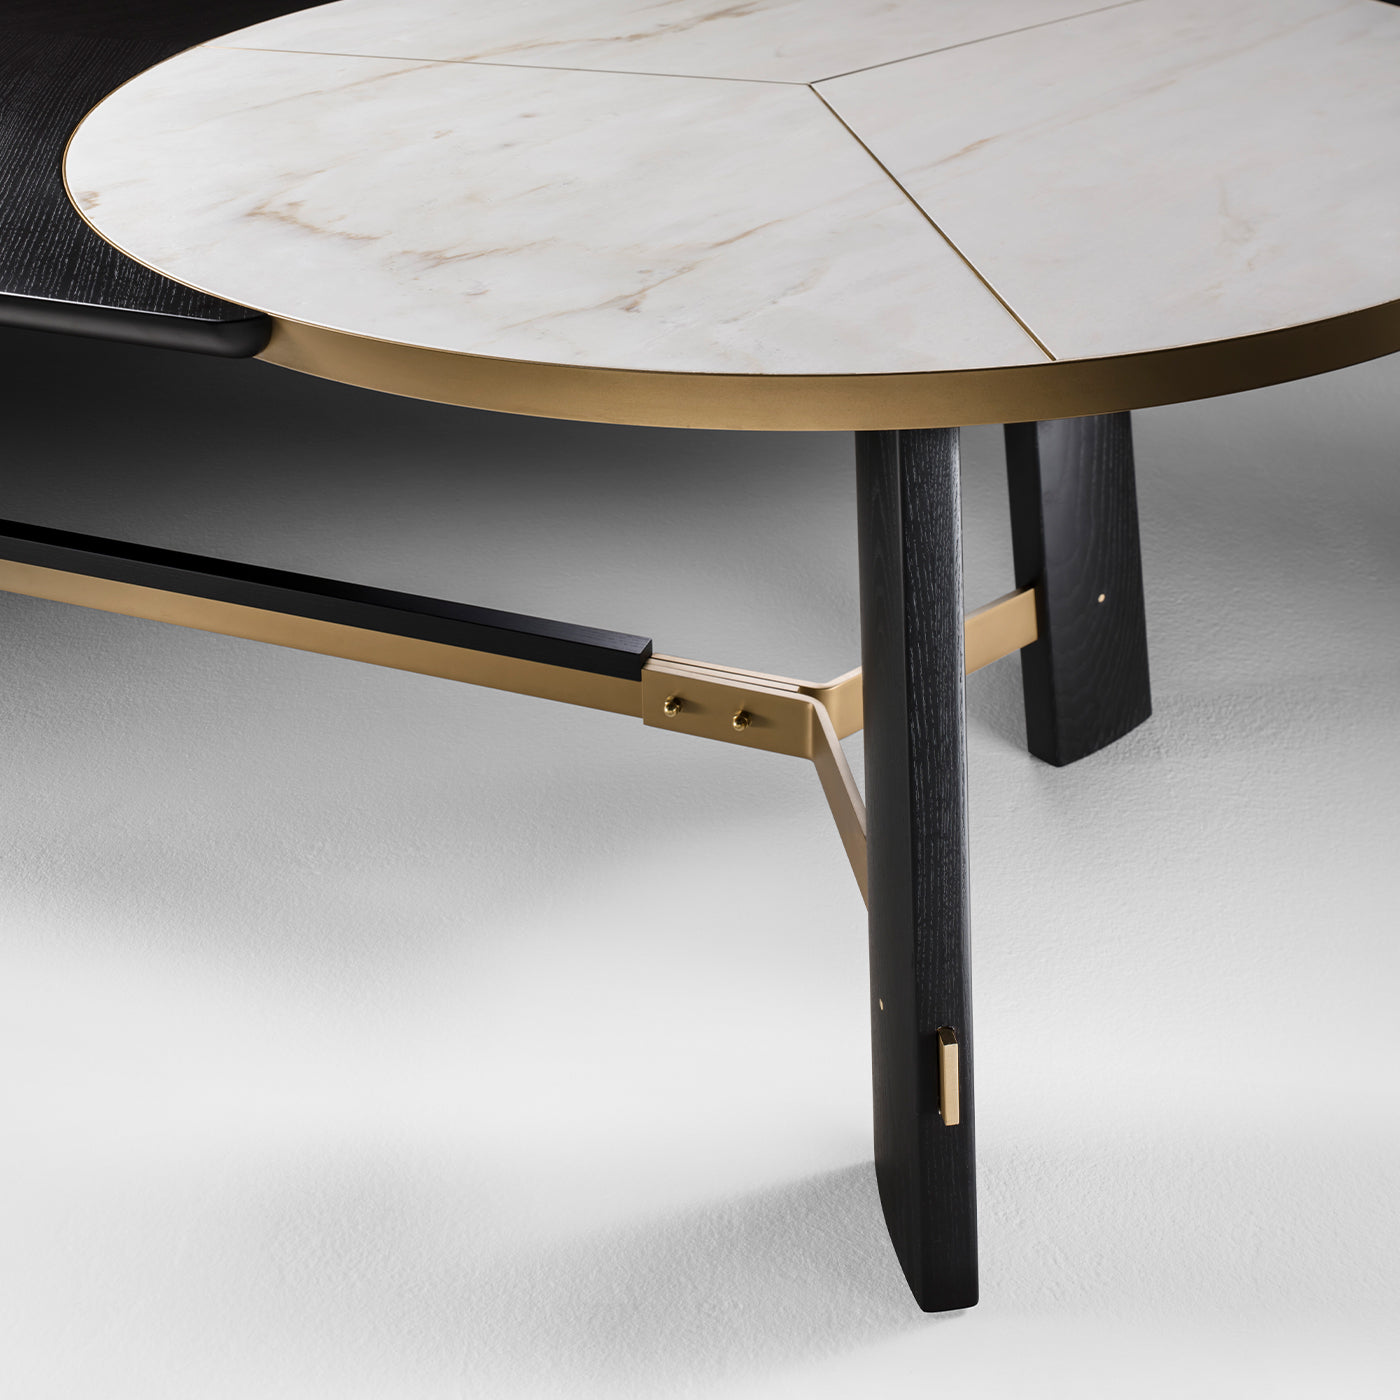 OPERA dining table - Alternative view 4